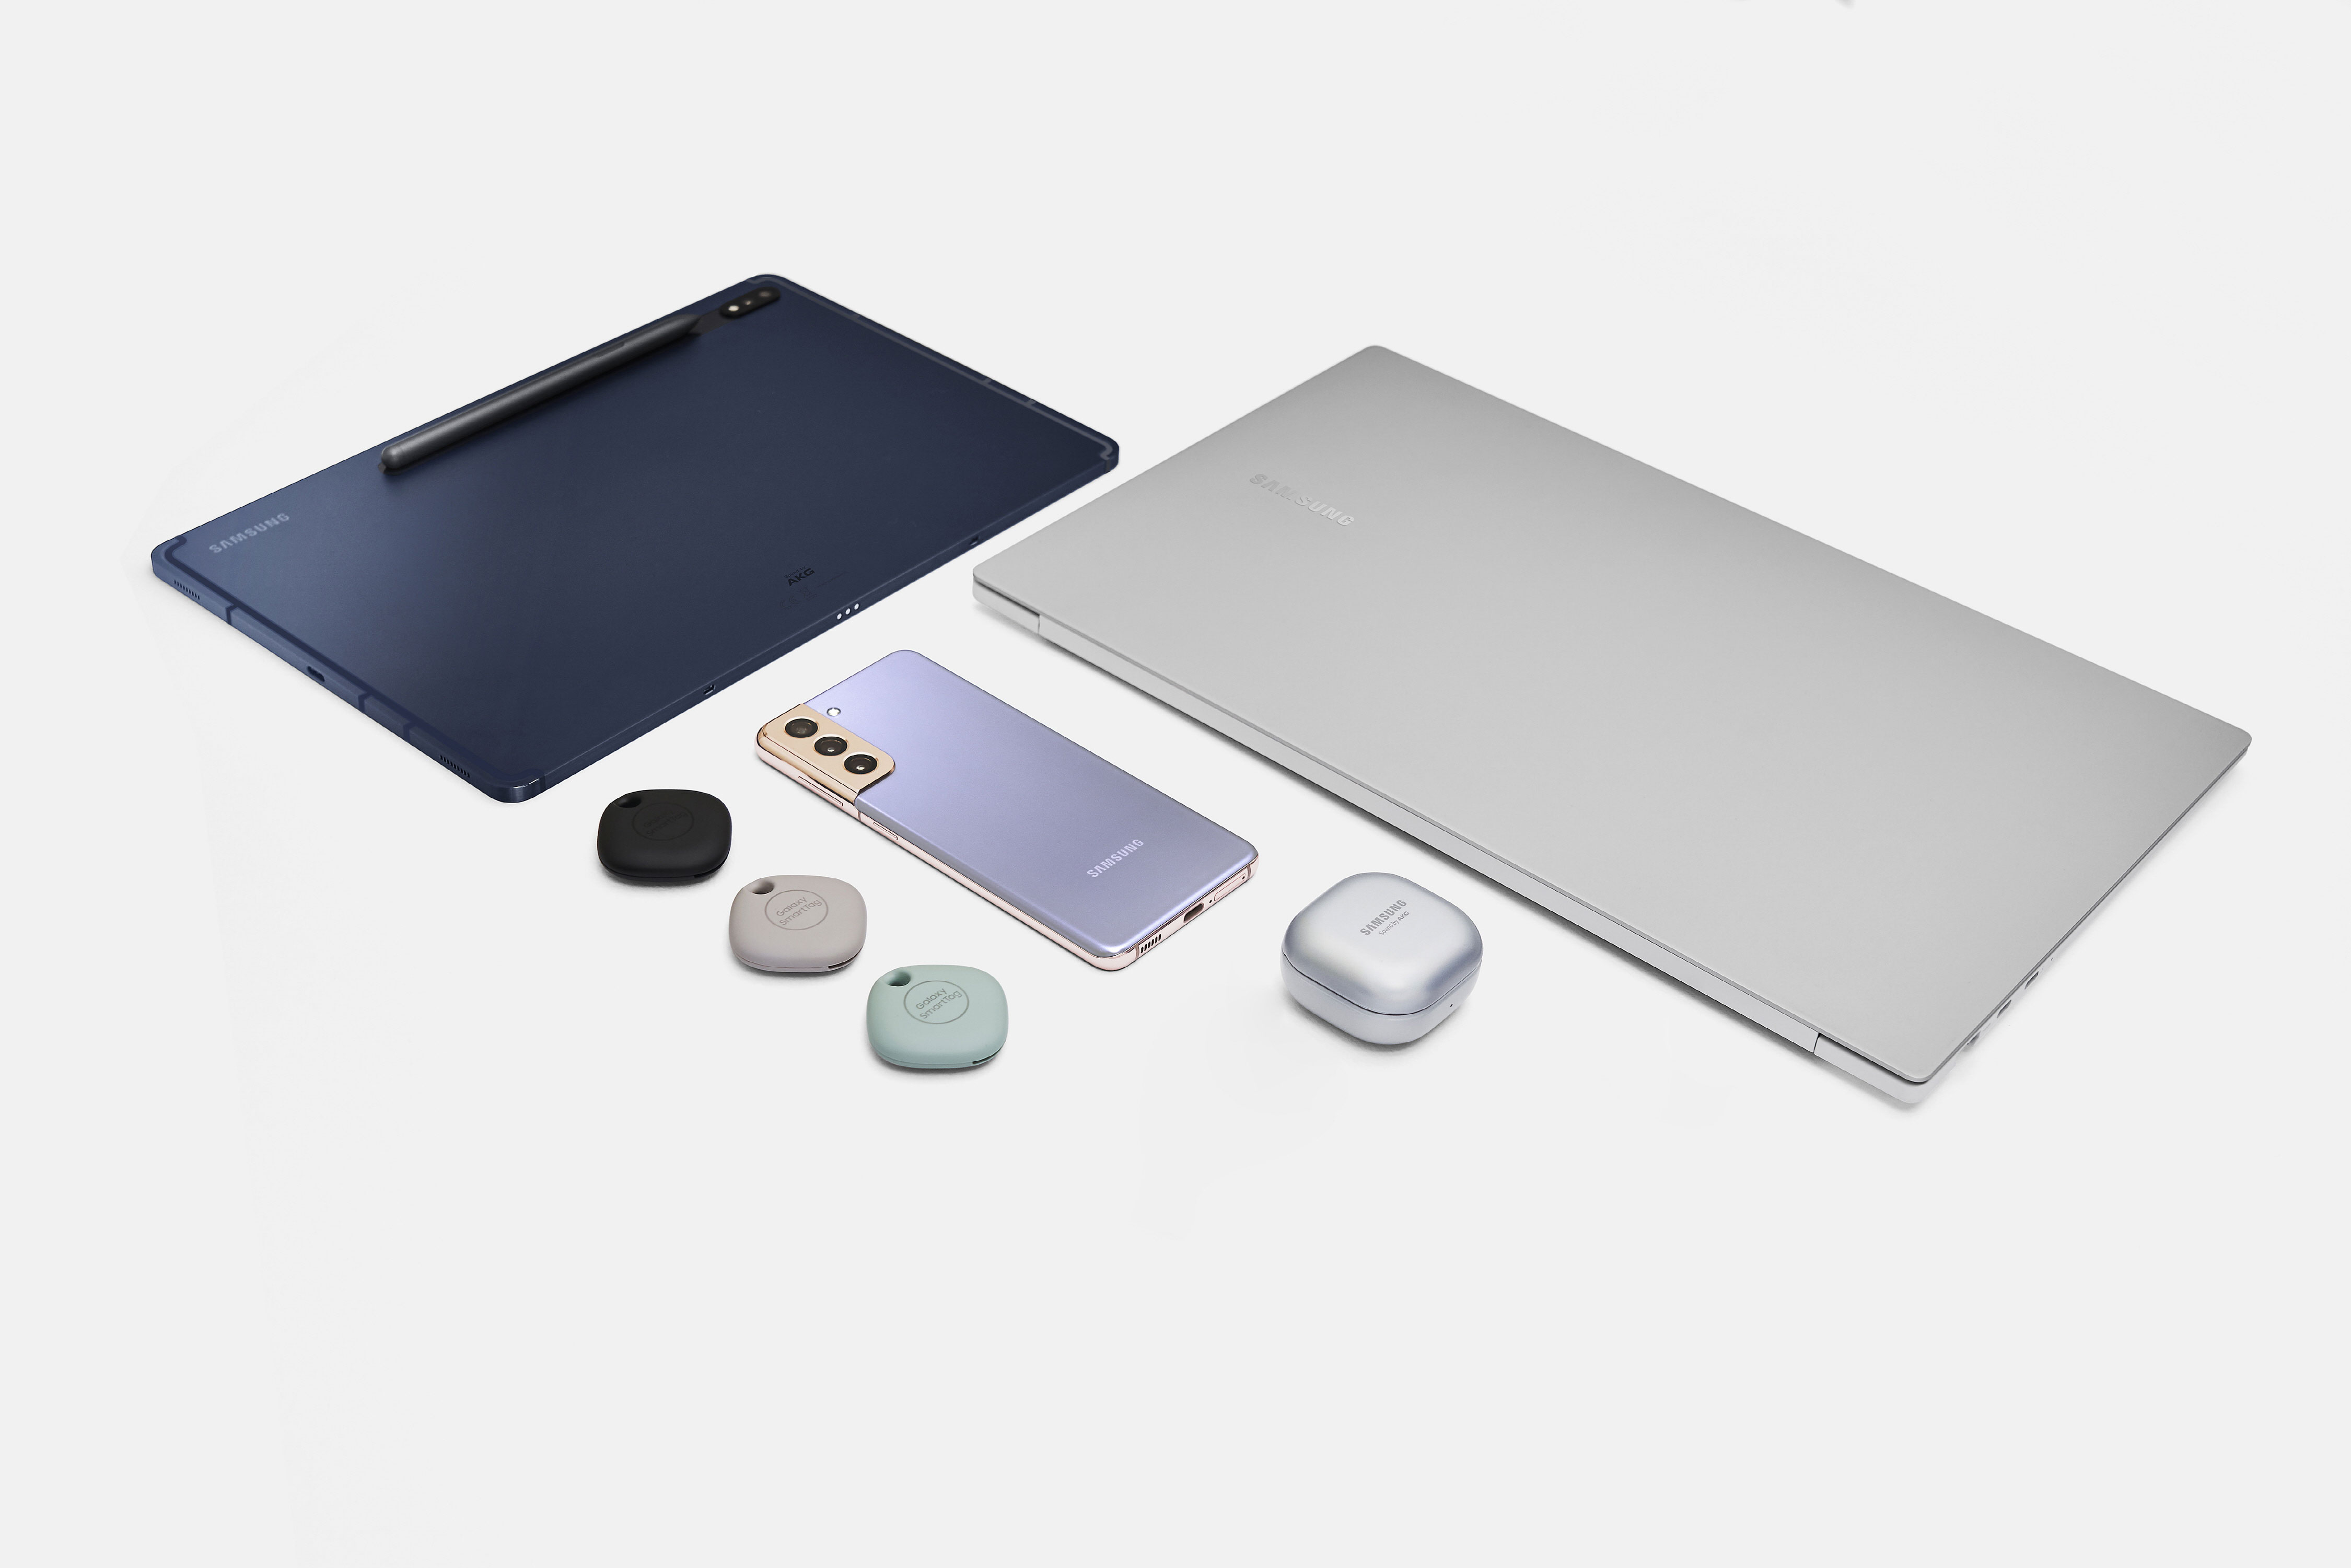 Galaxy Book Pro 15 inch in mystic silver with Galaxy S21 in violet Galaxy Tab S7 Plus in navy Galaxy SmartTags in black oatmeal and mint and Galaxy Buds Pro in silver all together on white surface